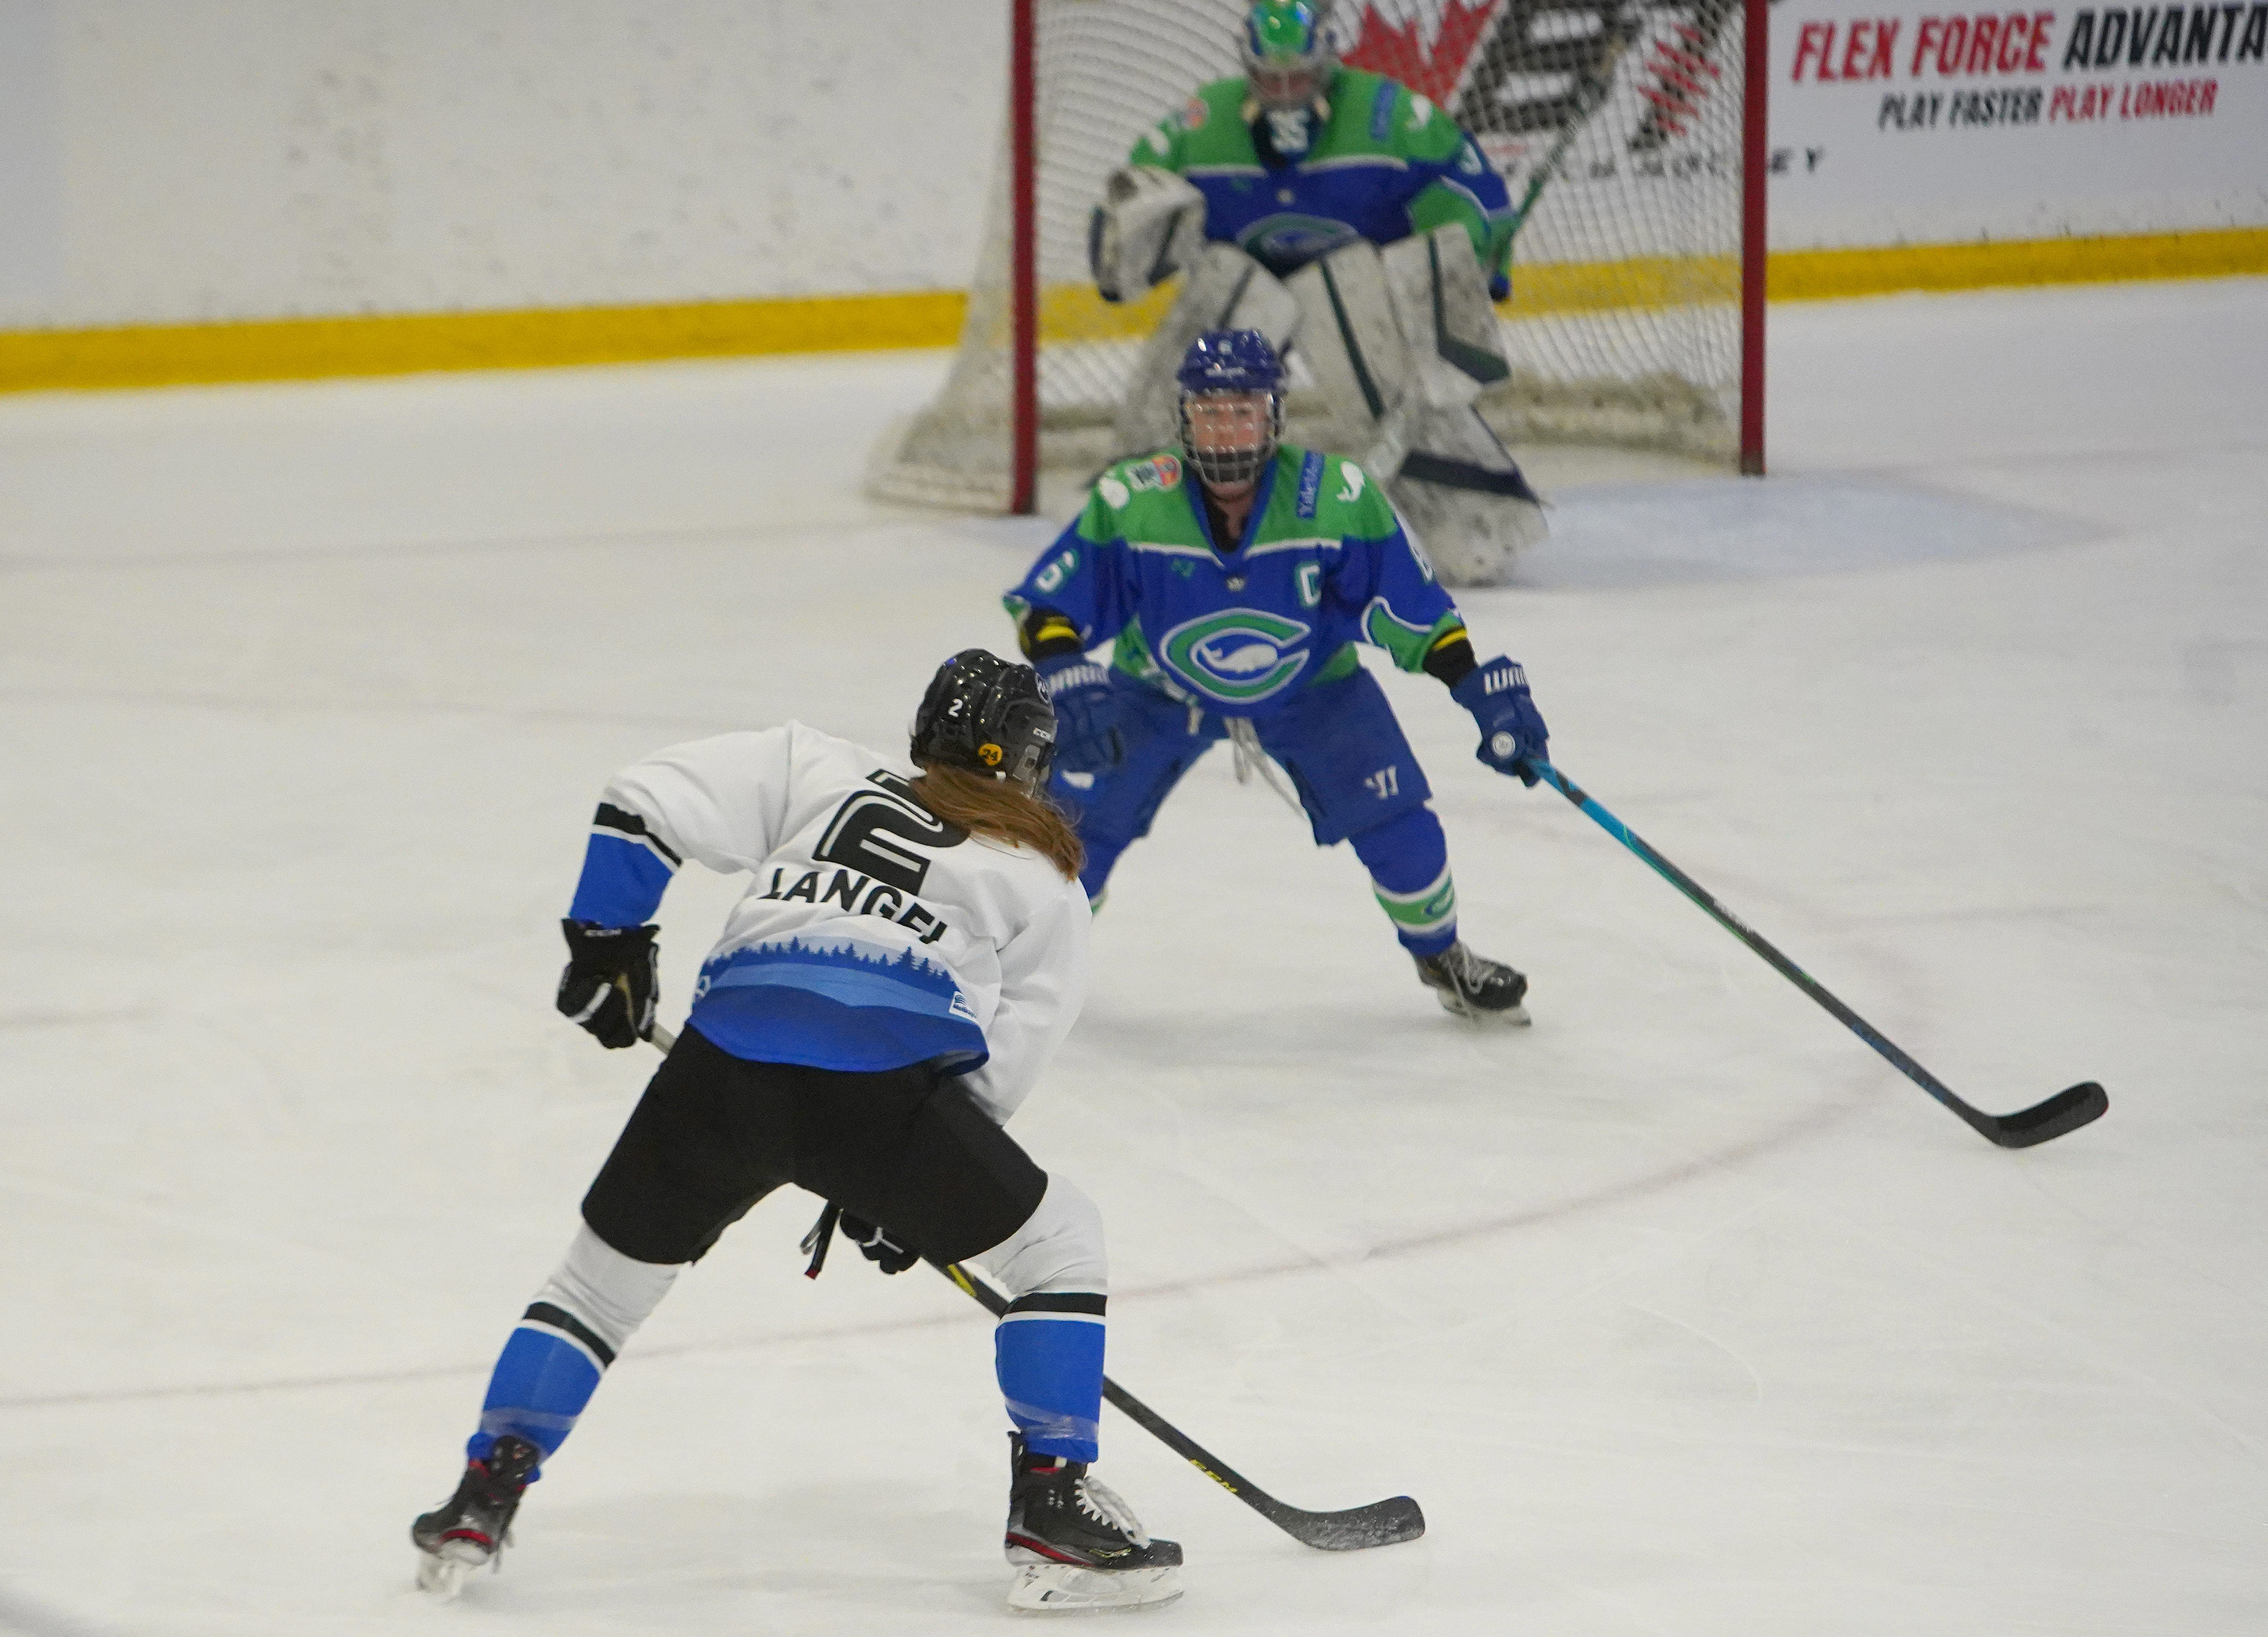 Whitecaps come up short with 4-3 loss in Isobel Cup Final